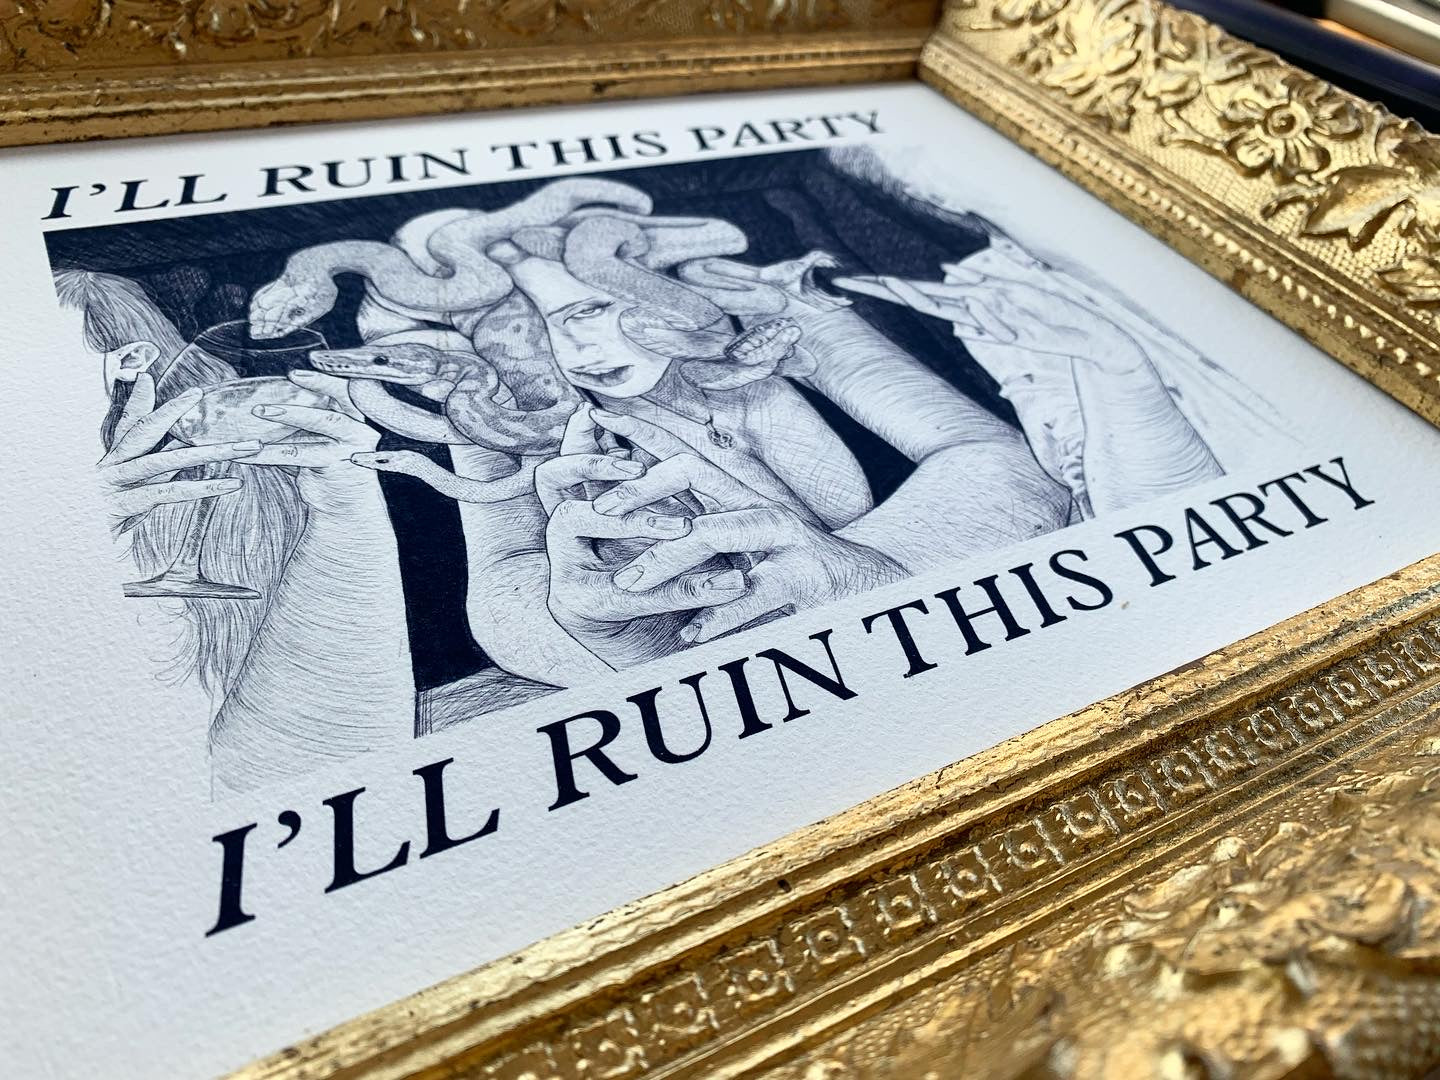 I'll ruin this party print